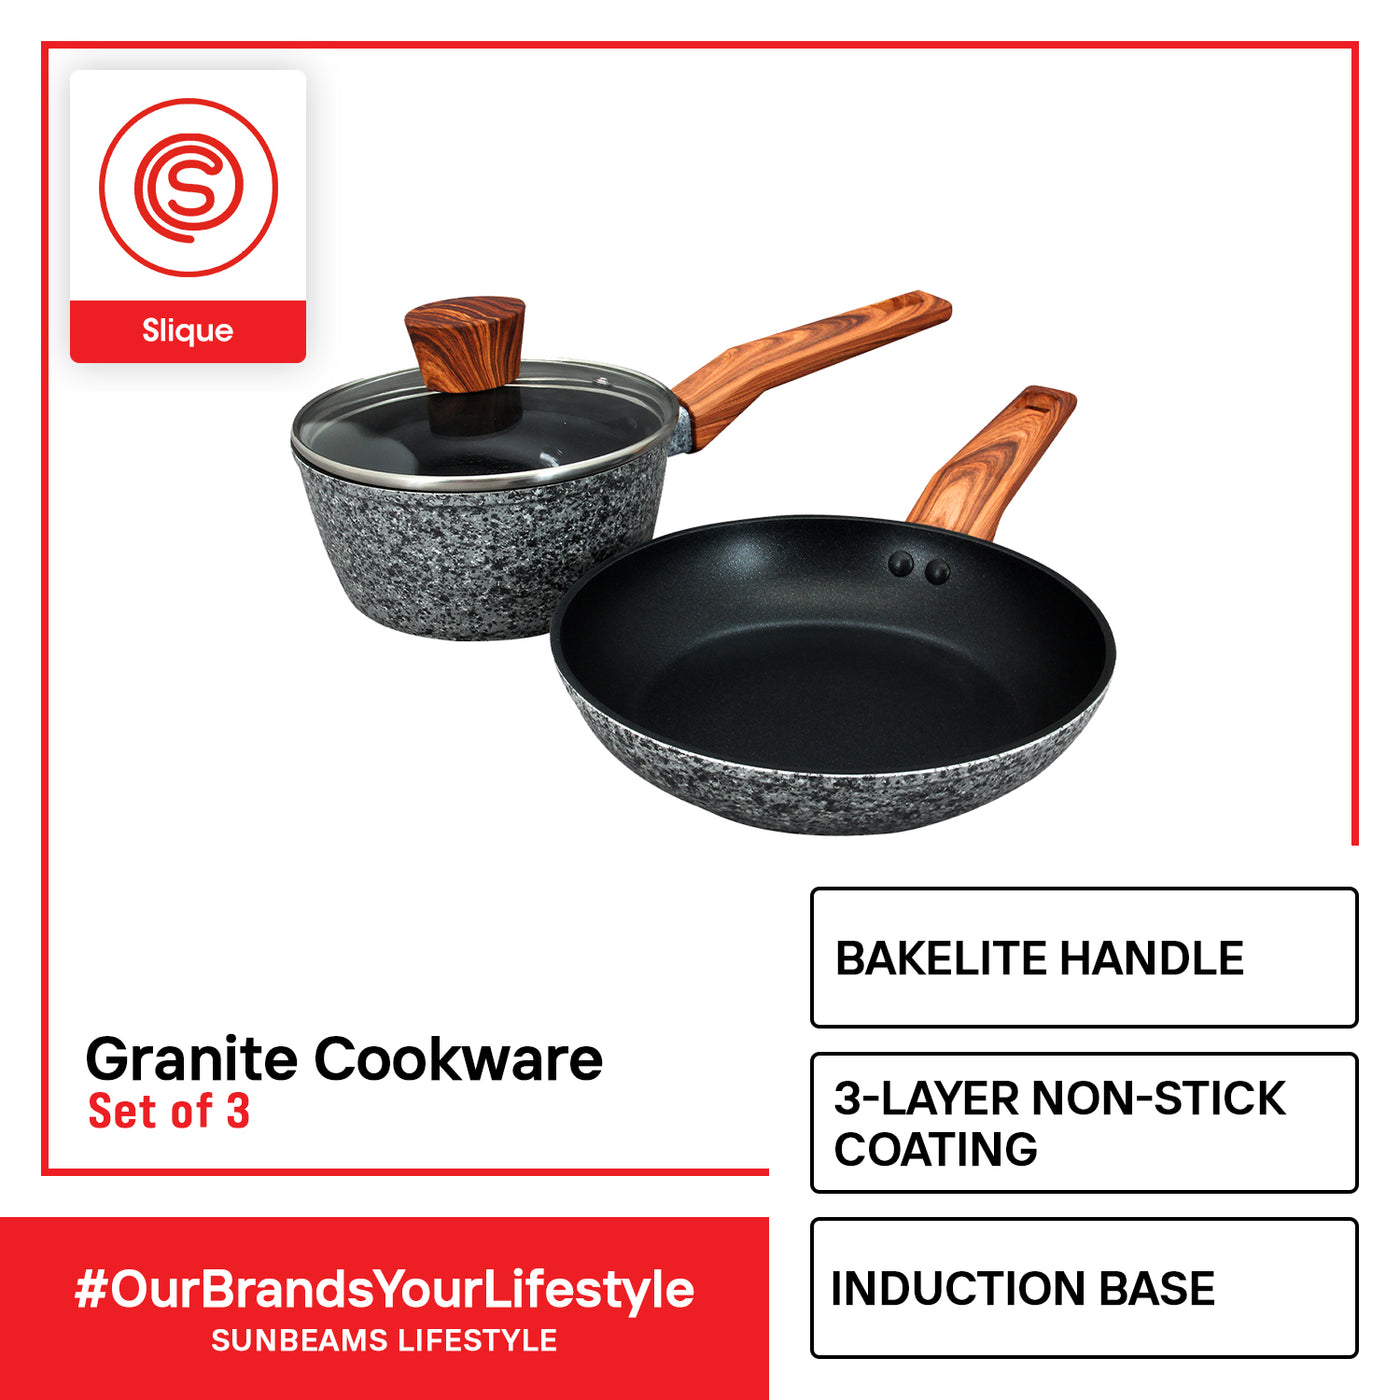 SLIQUE Granite Cookware Multi Layer Non-Stick Coating Induction Base Wooden Finish Bakelite Handle Set of 3 Amazing Gift Idea For Any Occasion!